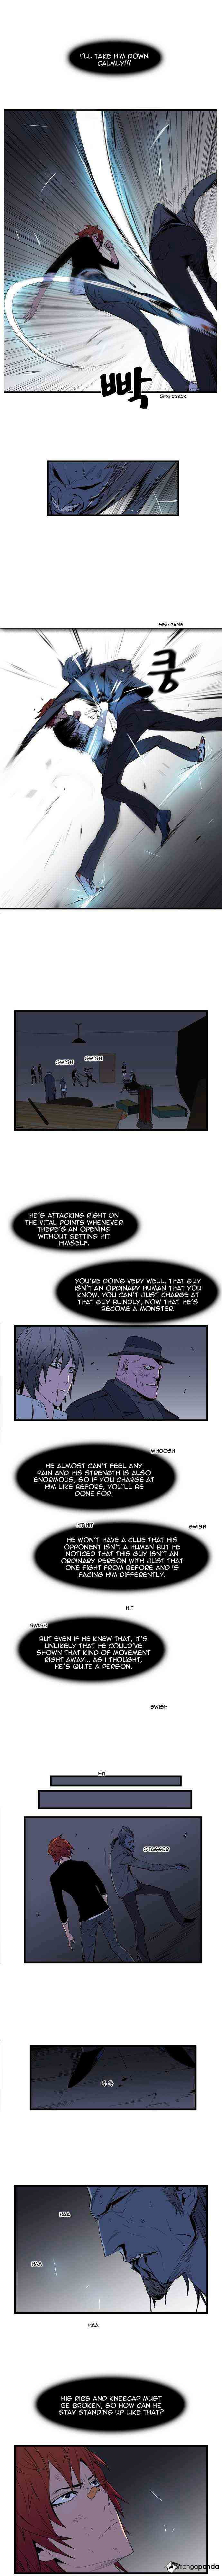 Noblesse Chapter 68 page 4